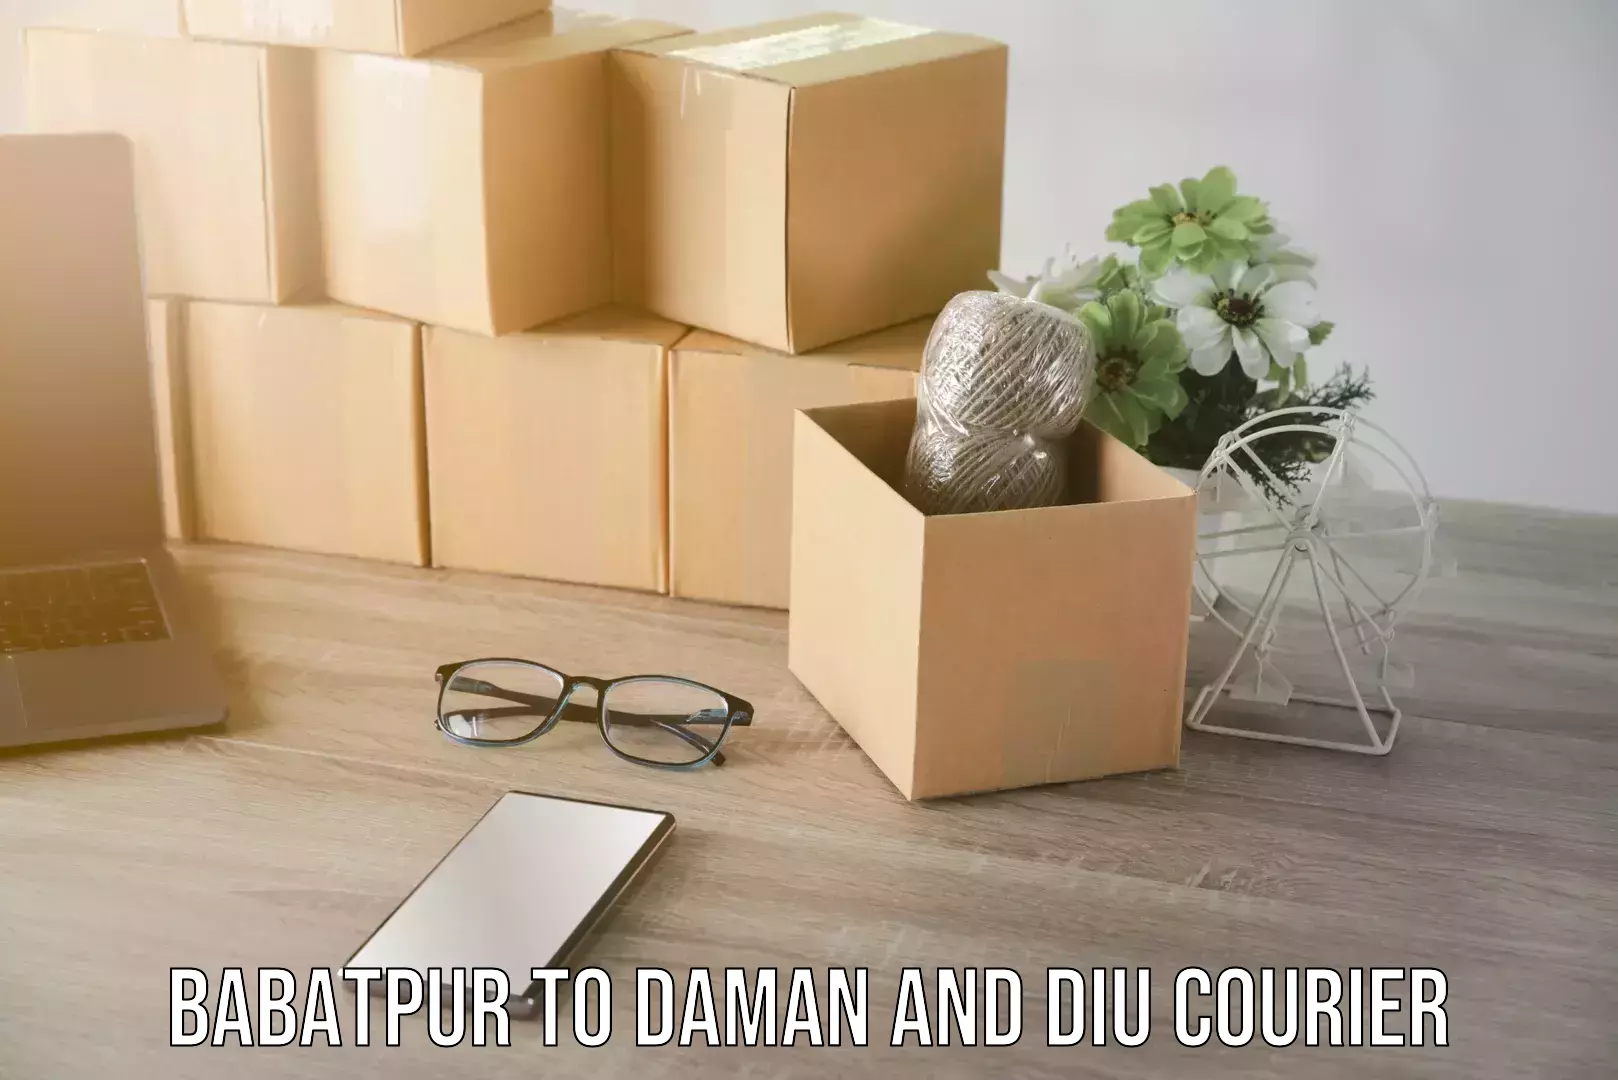 Reliable delivery network Babatpur to Daman and Diu